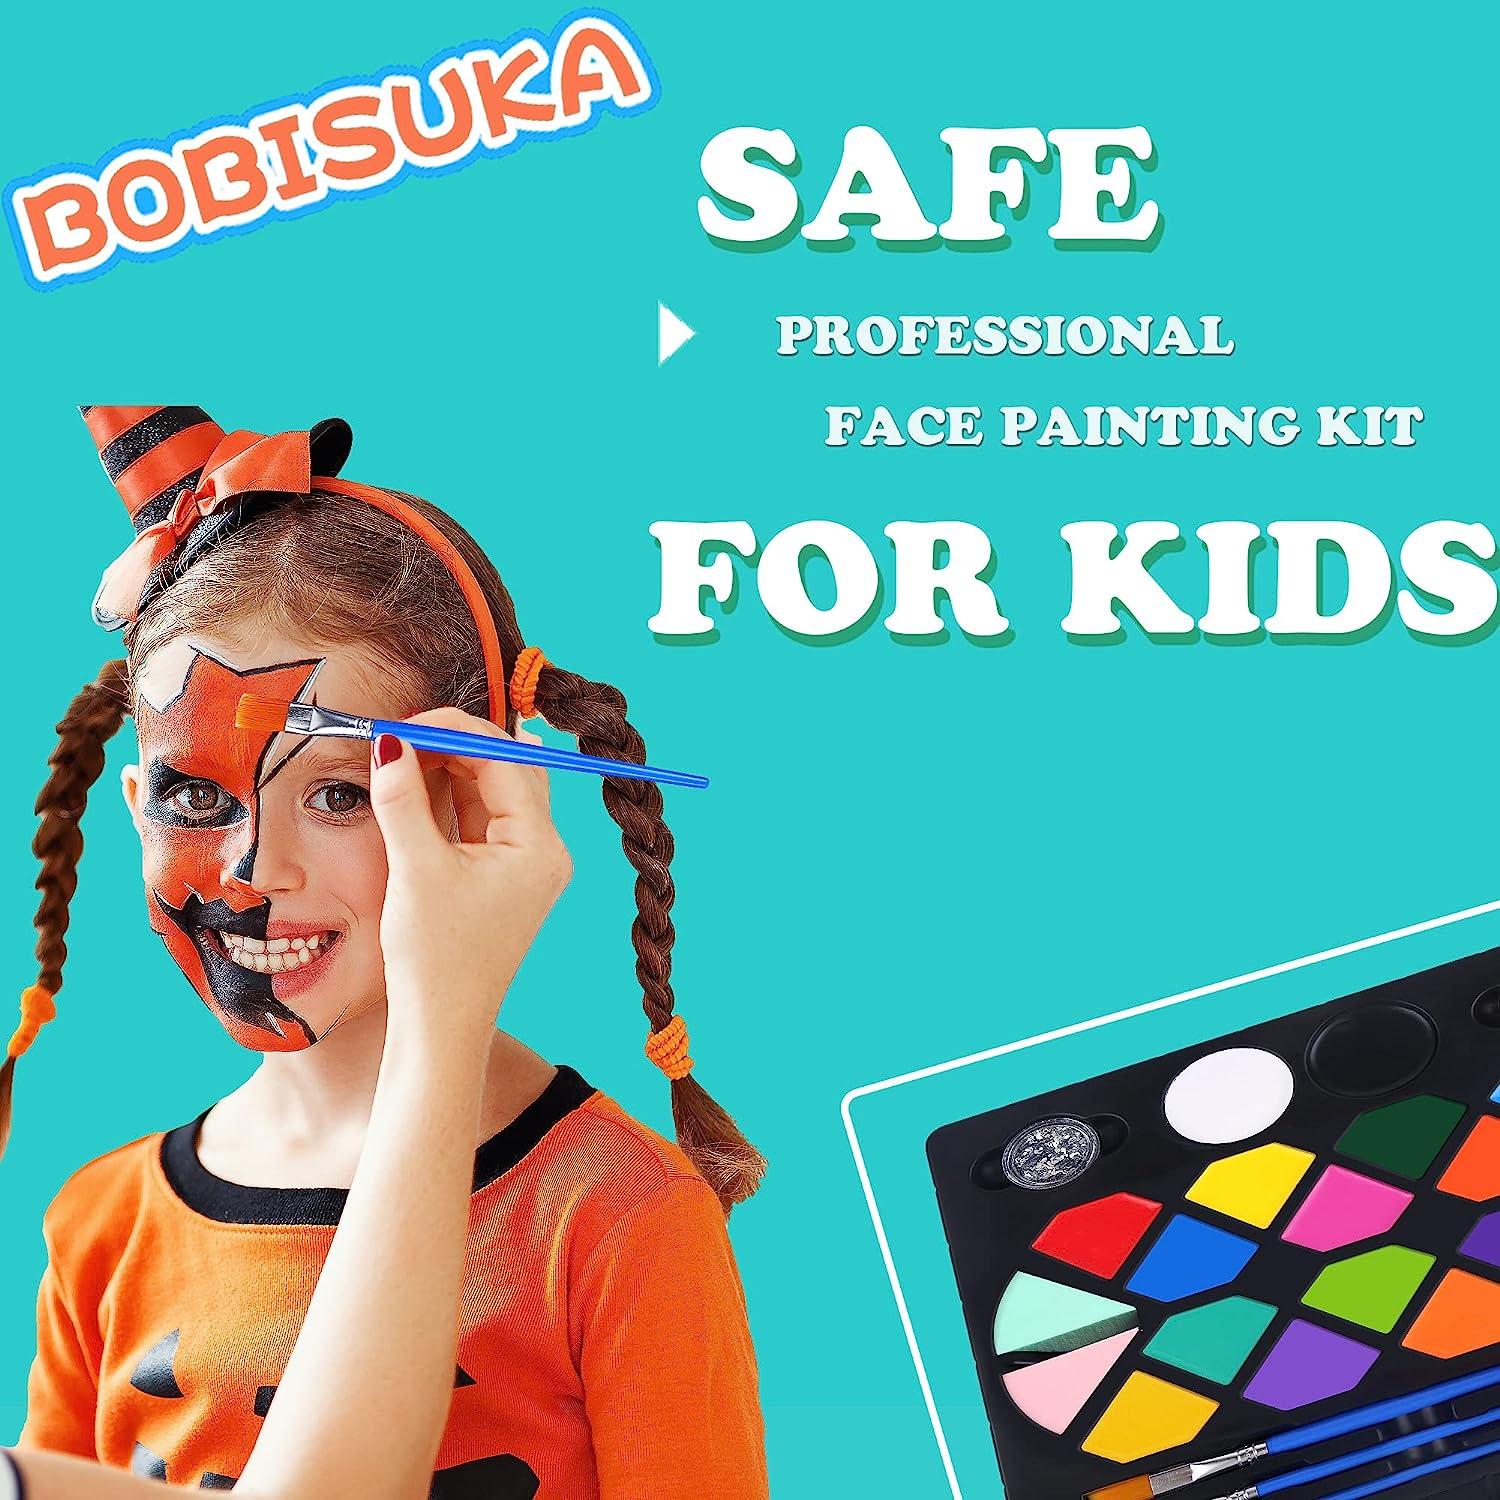 BOBISUKA Face Painting Kit for Kids - 16 Colors Water Based Body Face Paint  Includes Brushes,Sponges,Glitters,Gem Sheet,Instructions,Stencils for  Halloween Party Costume SFX Makeup